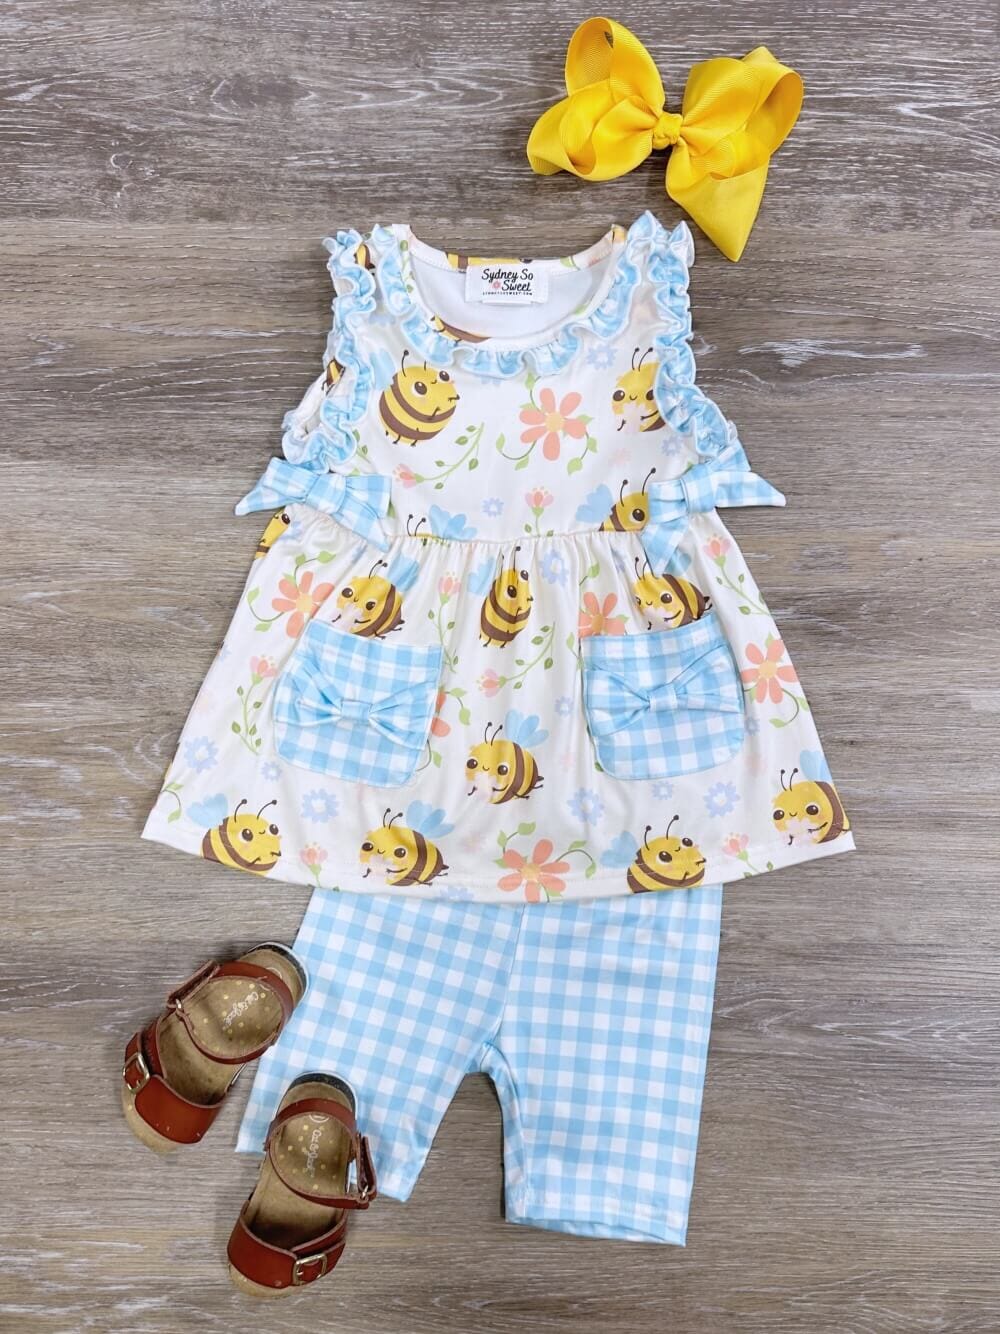 Bee Happy Blue Gingham Plaid Girls Shorts Outfit - Sydney So Sweet